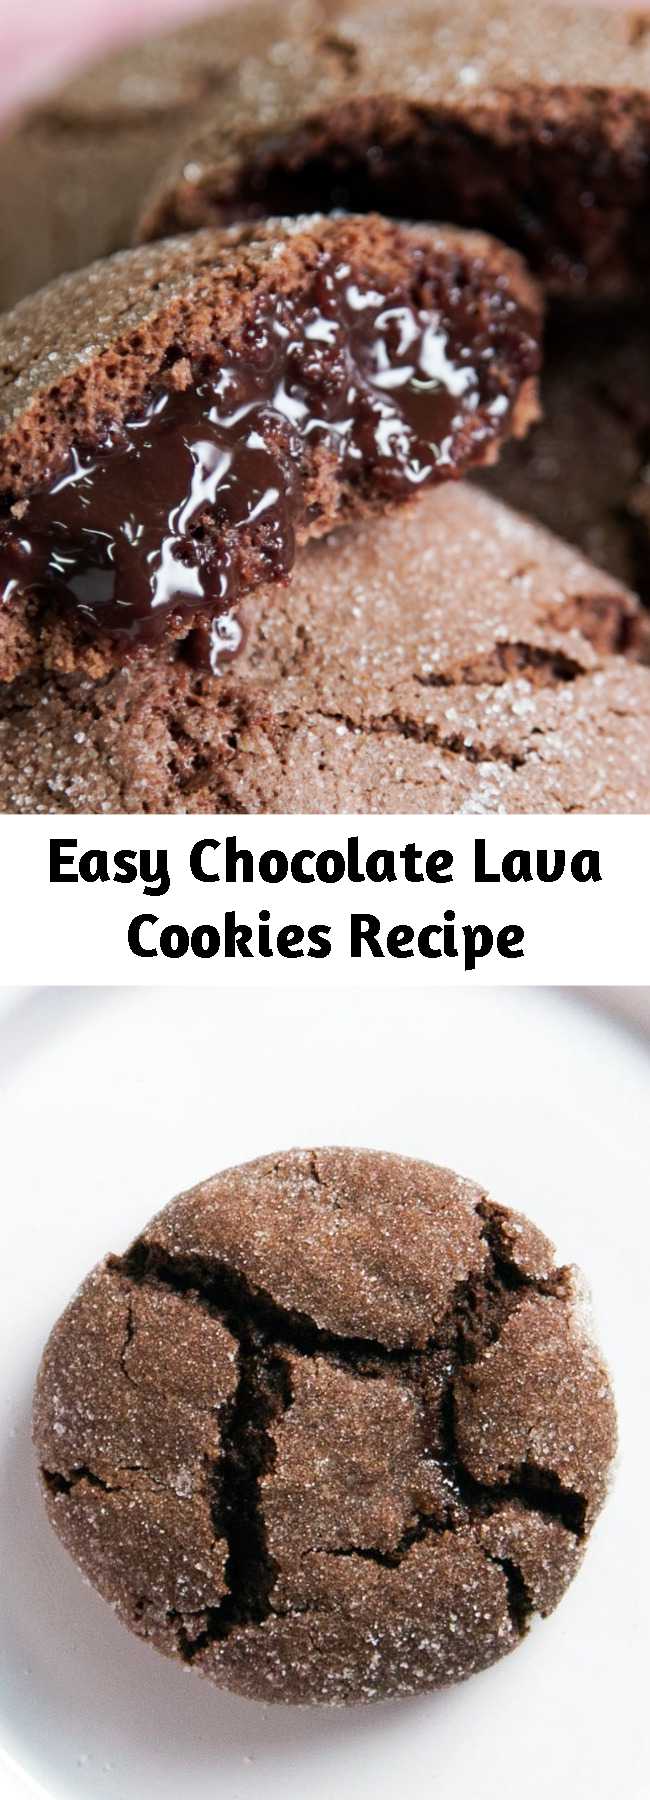 Easy Chocolate Lava Cookies Recipe - These chewy chocolate lava cookies hide an oh-so-rich, ooey-gooey chocolate center.